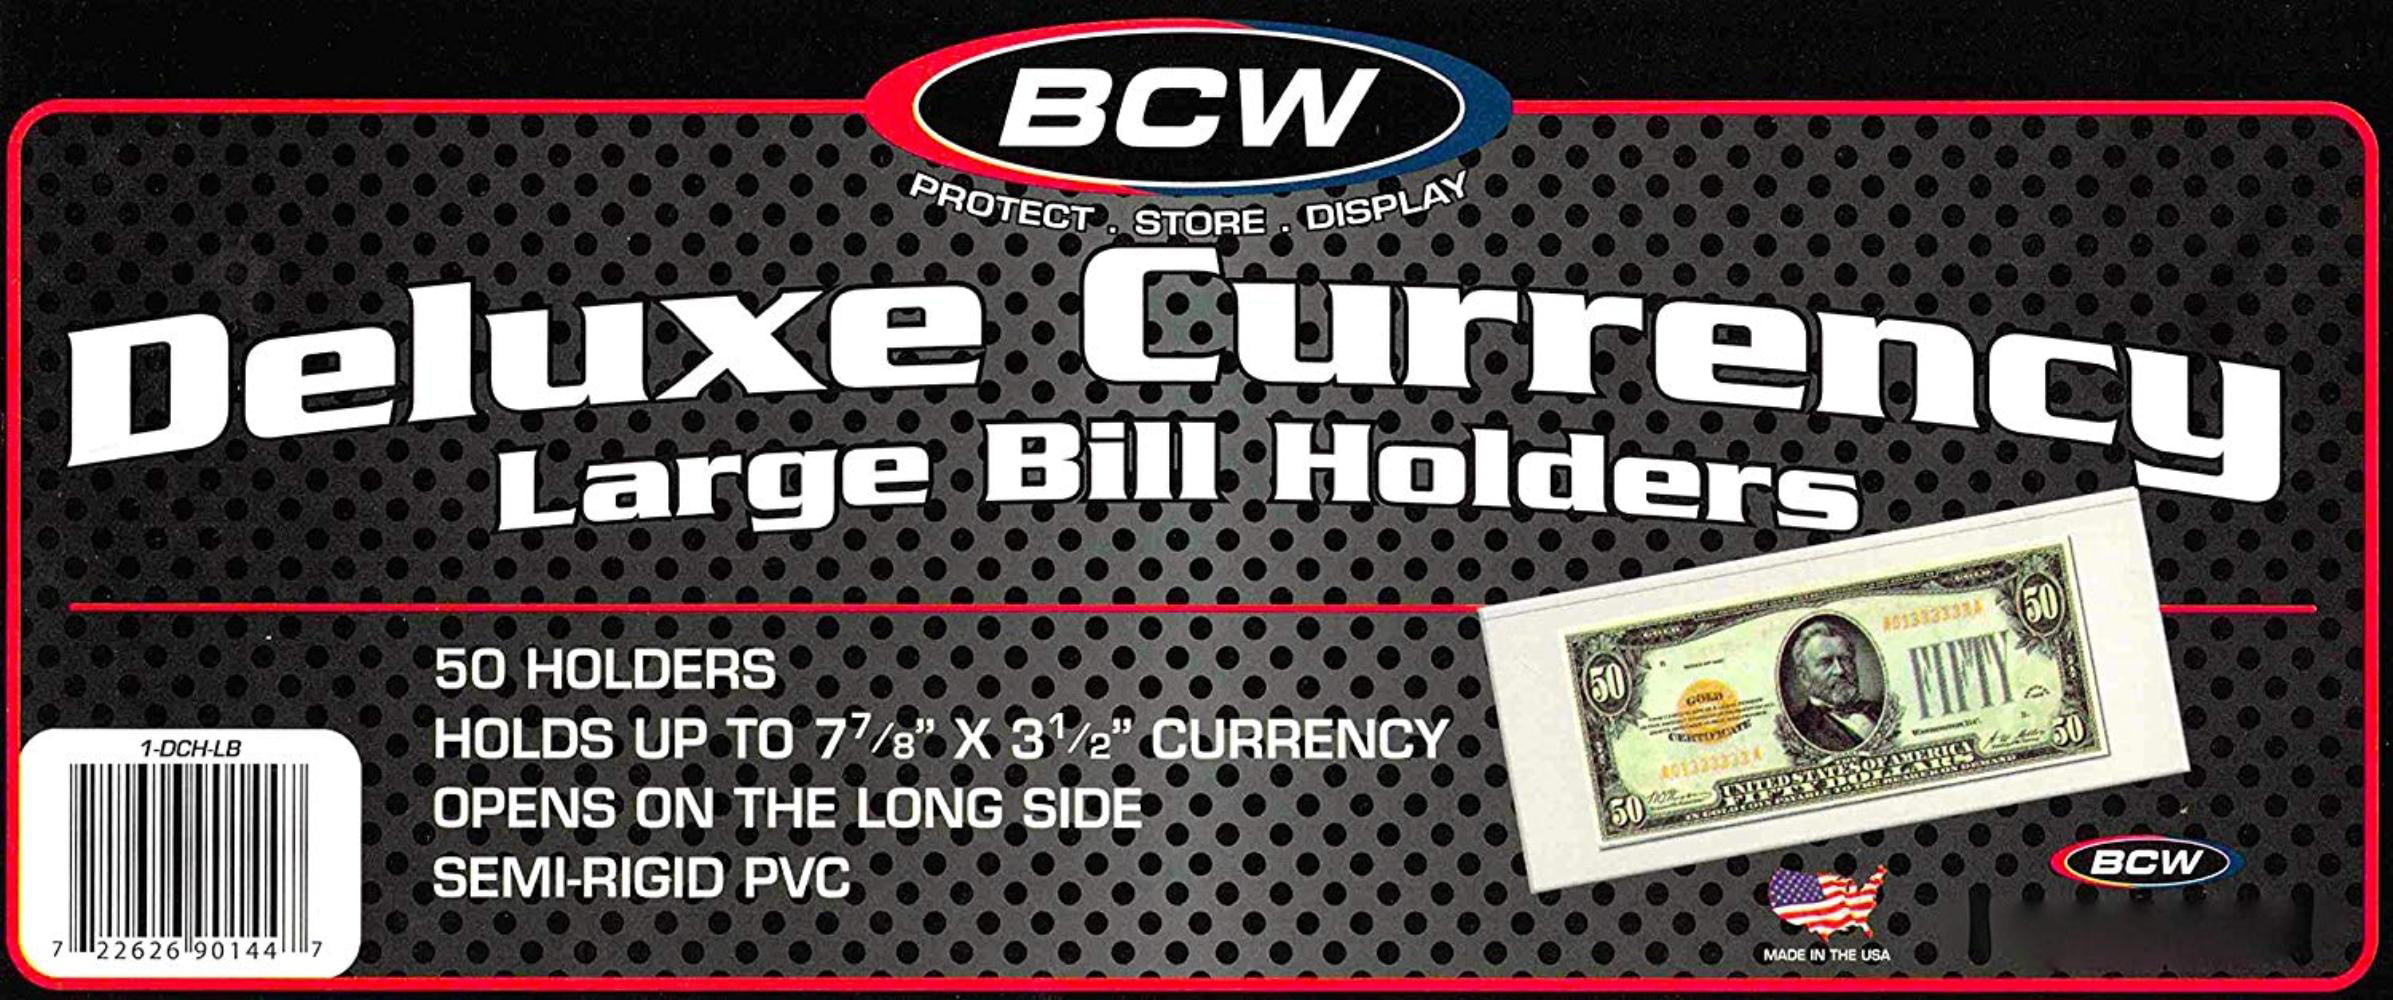 BCW Semi Rigid Large Bill Currency Money Storage Holder Protector 2 Packs 100 